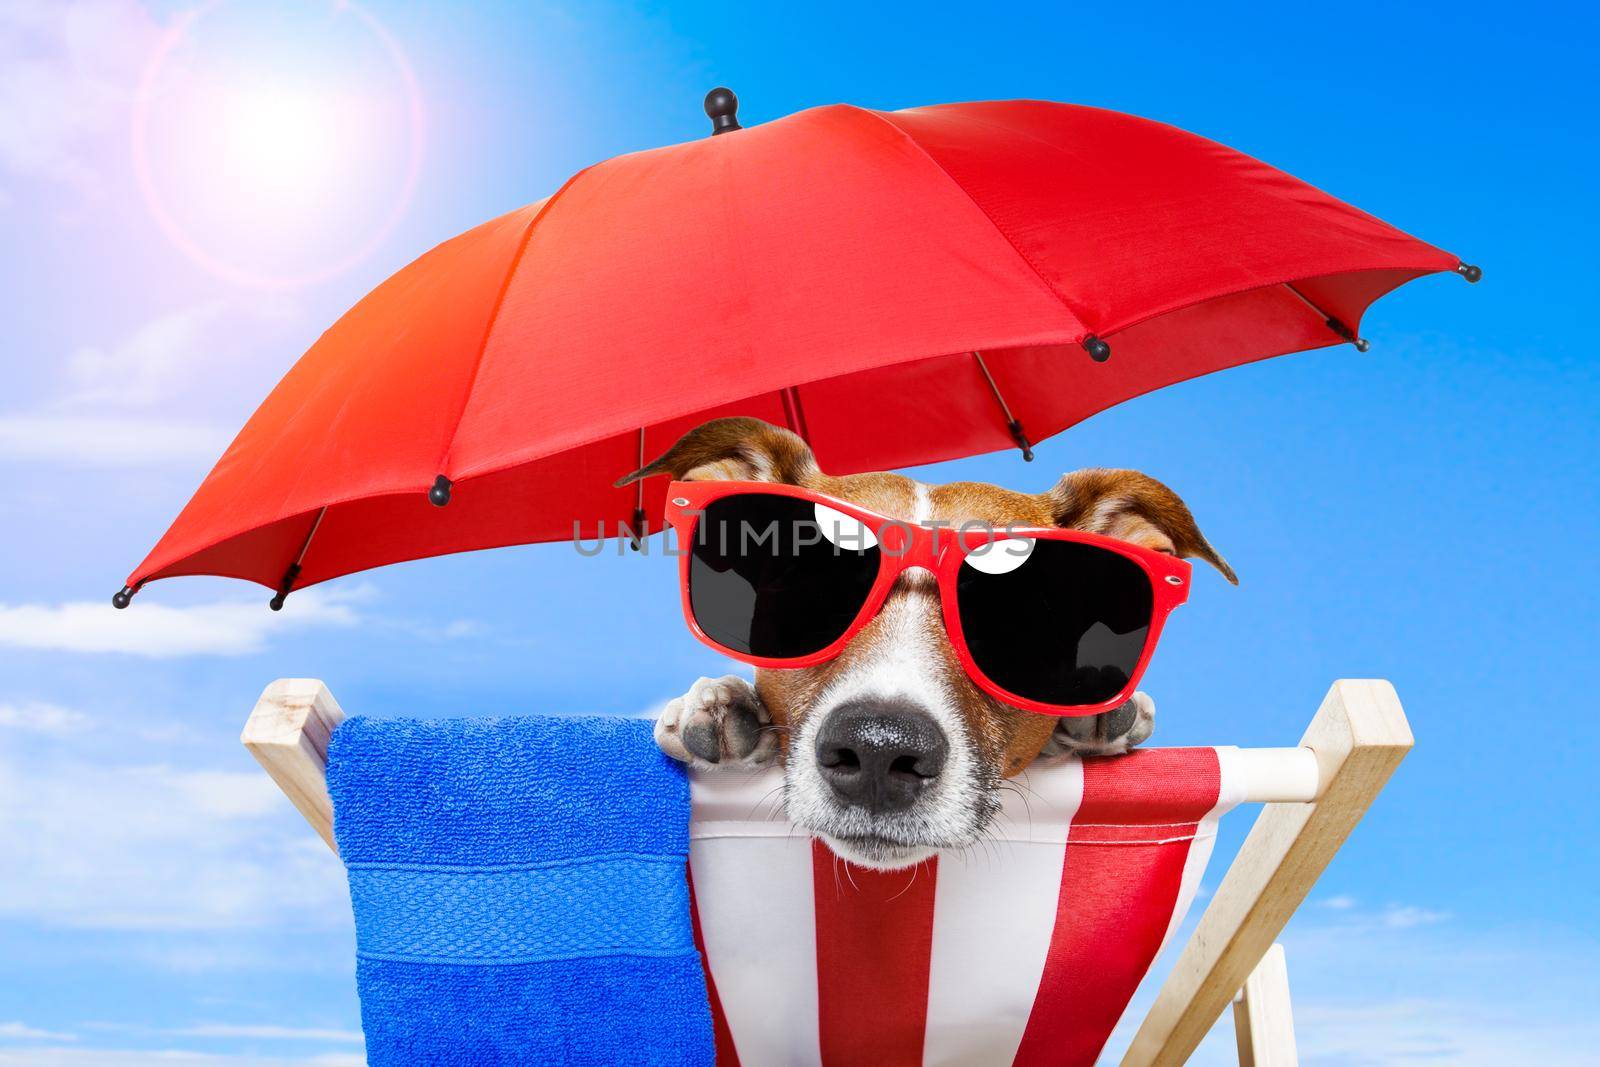 dog sunbathing on a deck chair with red umbrella